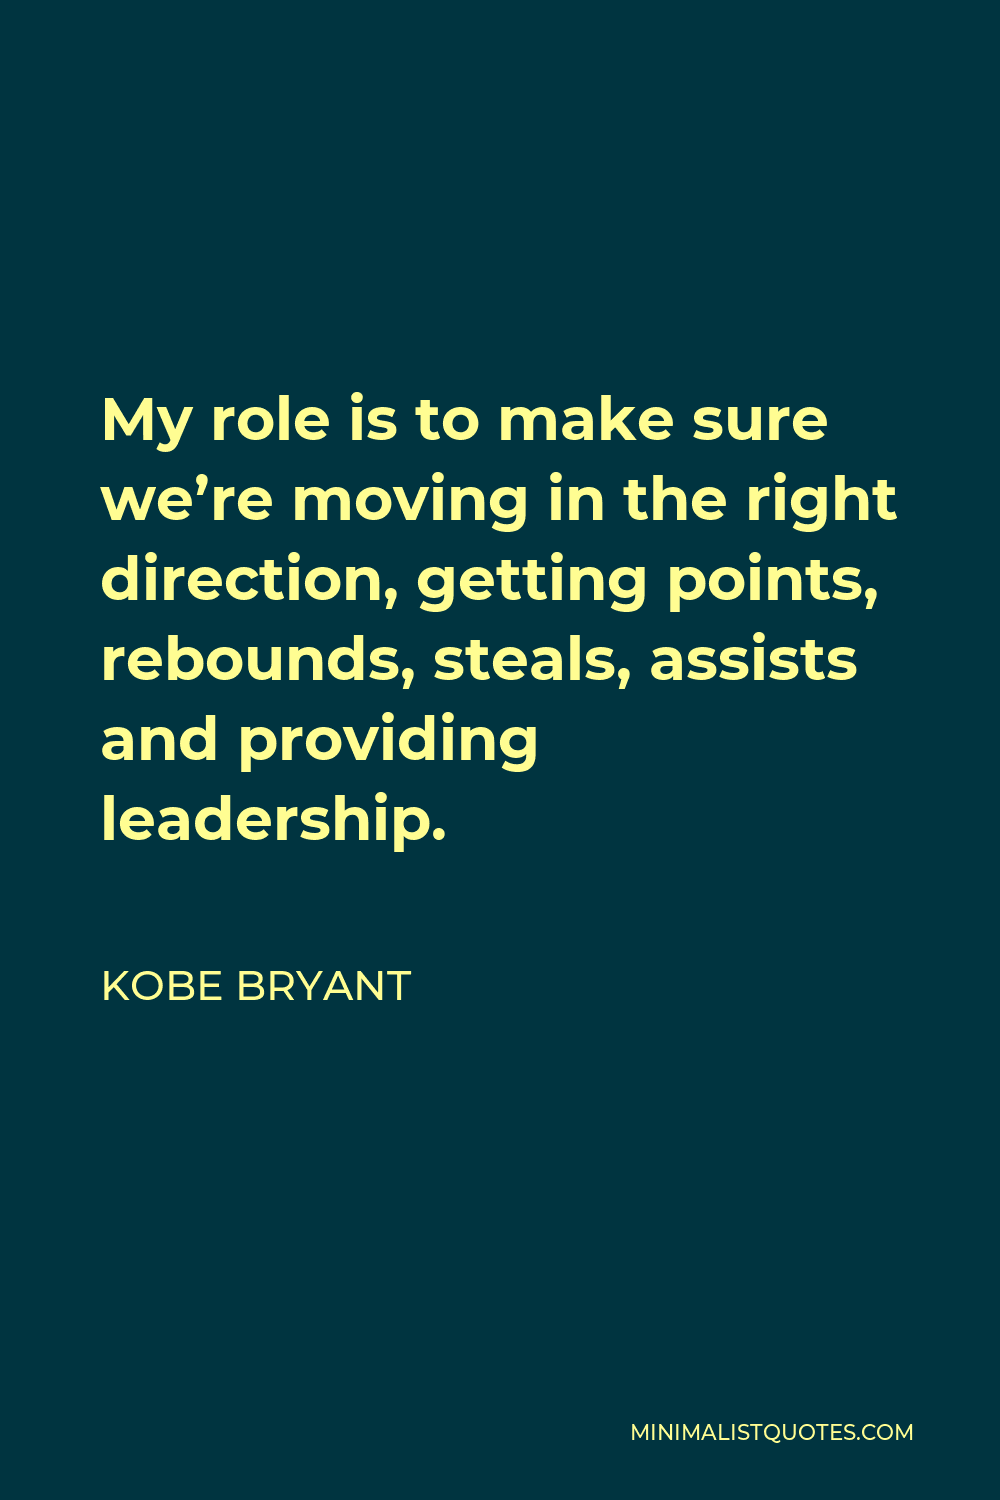 Kobe Bryant Quote - My role is to make sure we’re moving in the right direction, getting points, rebounds, steals, assists and providing leadership.